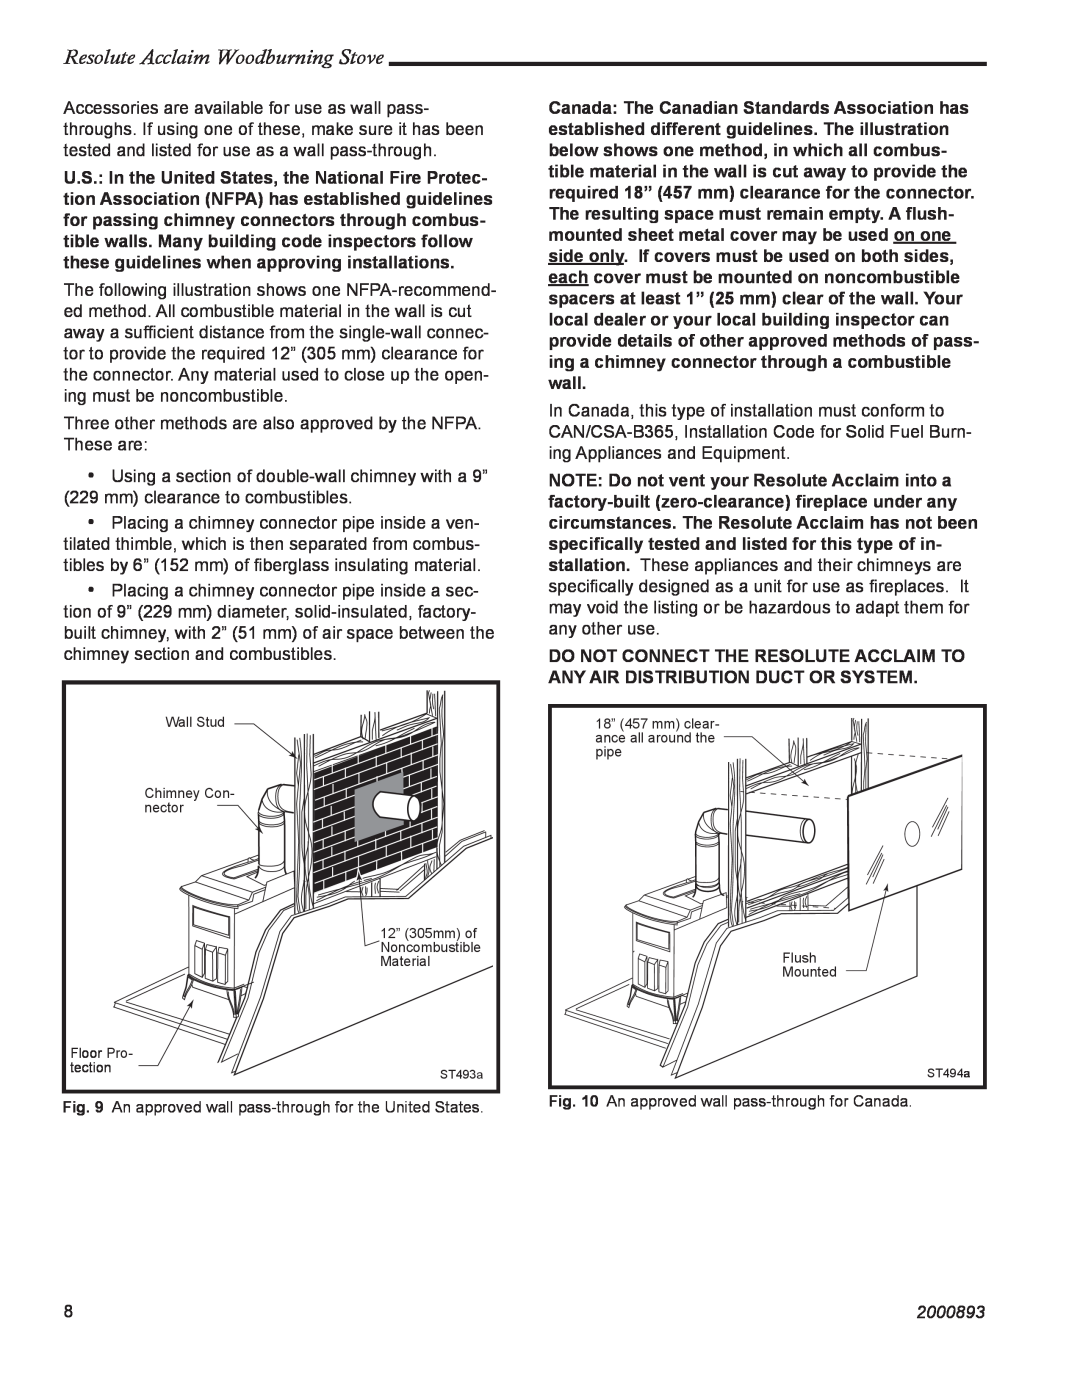 Vermont Casting 2490 installation instructions Resolute Acclaim Woodburning Stove, 2000893 